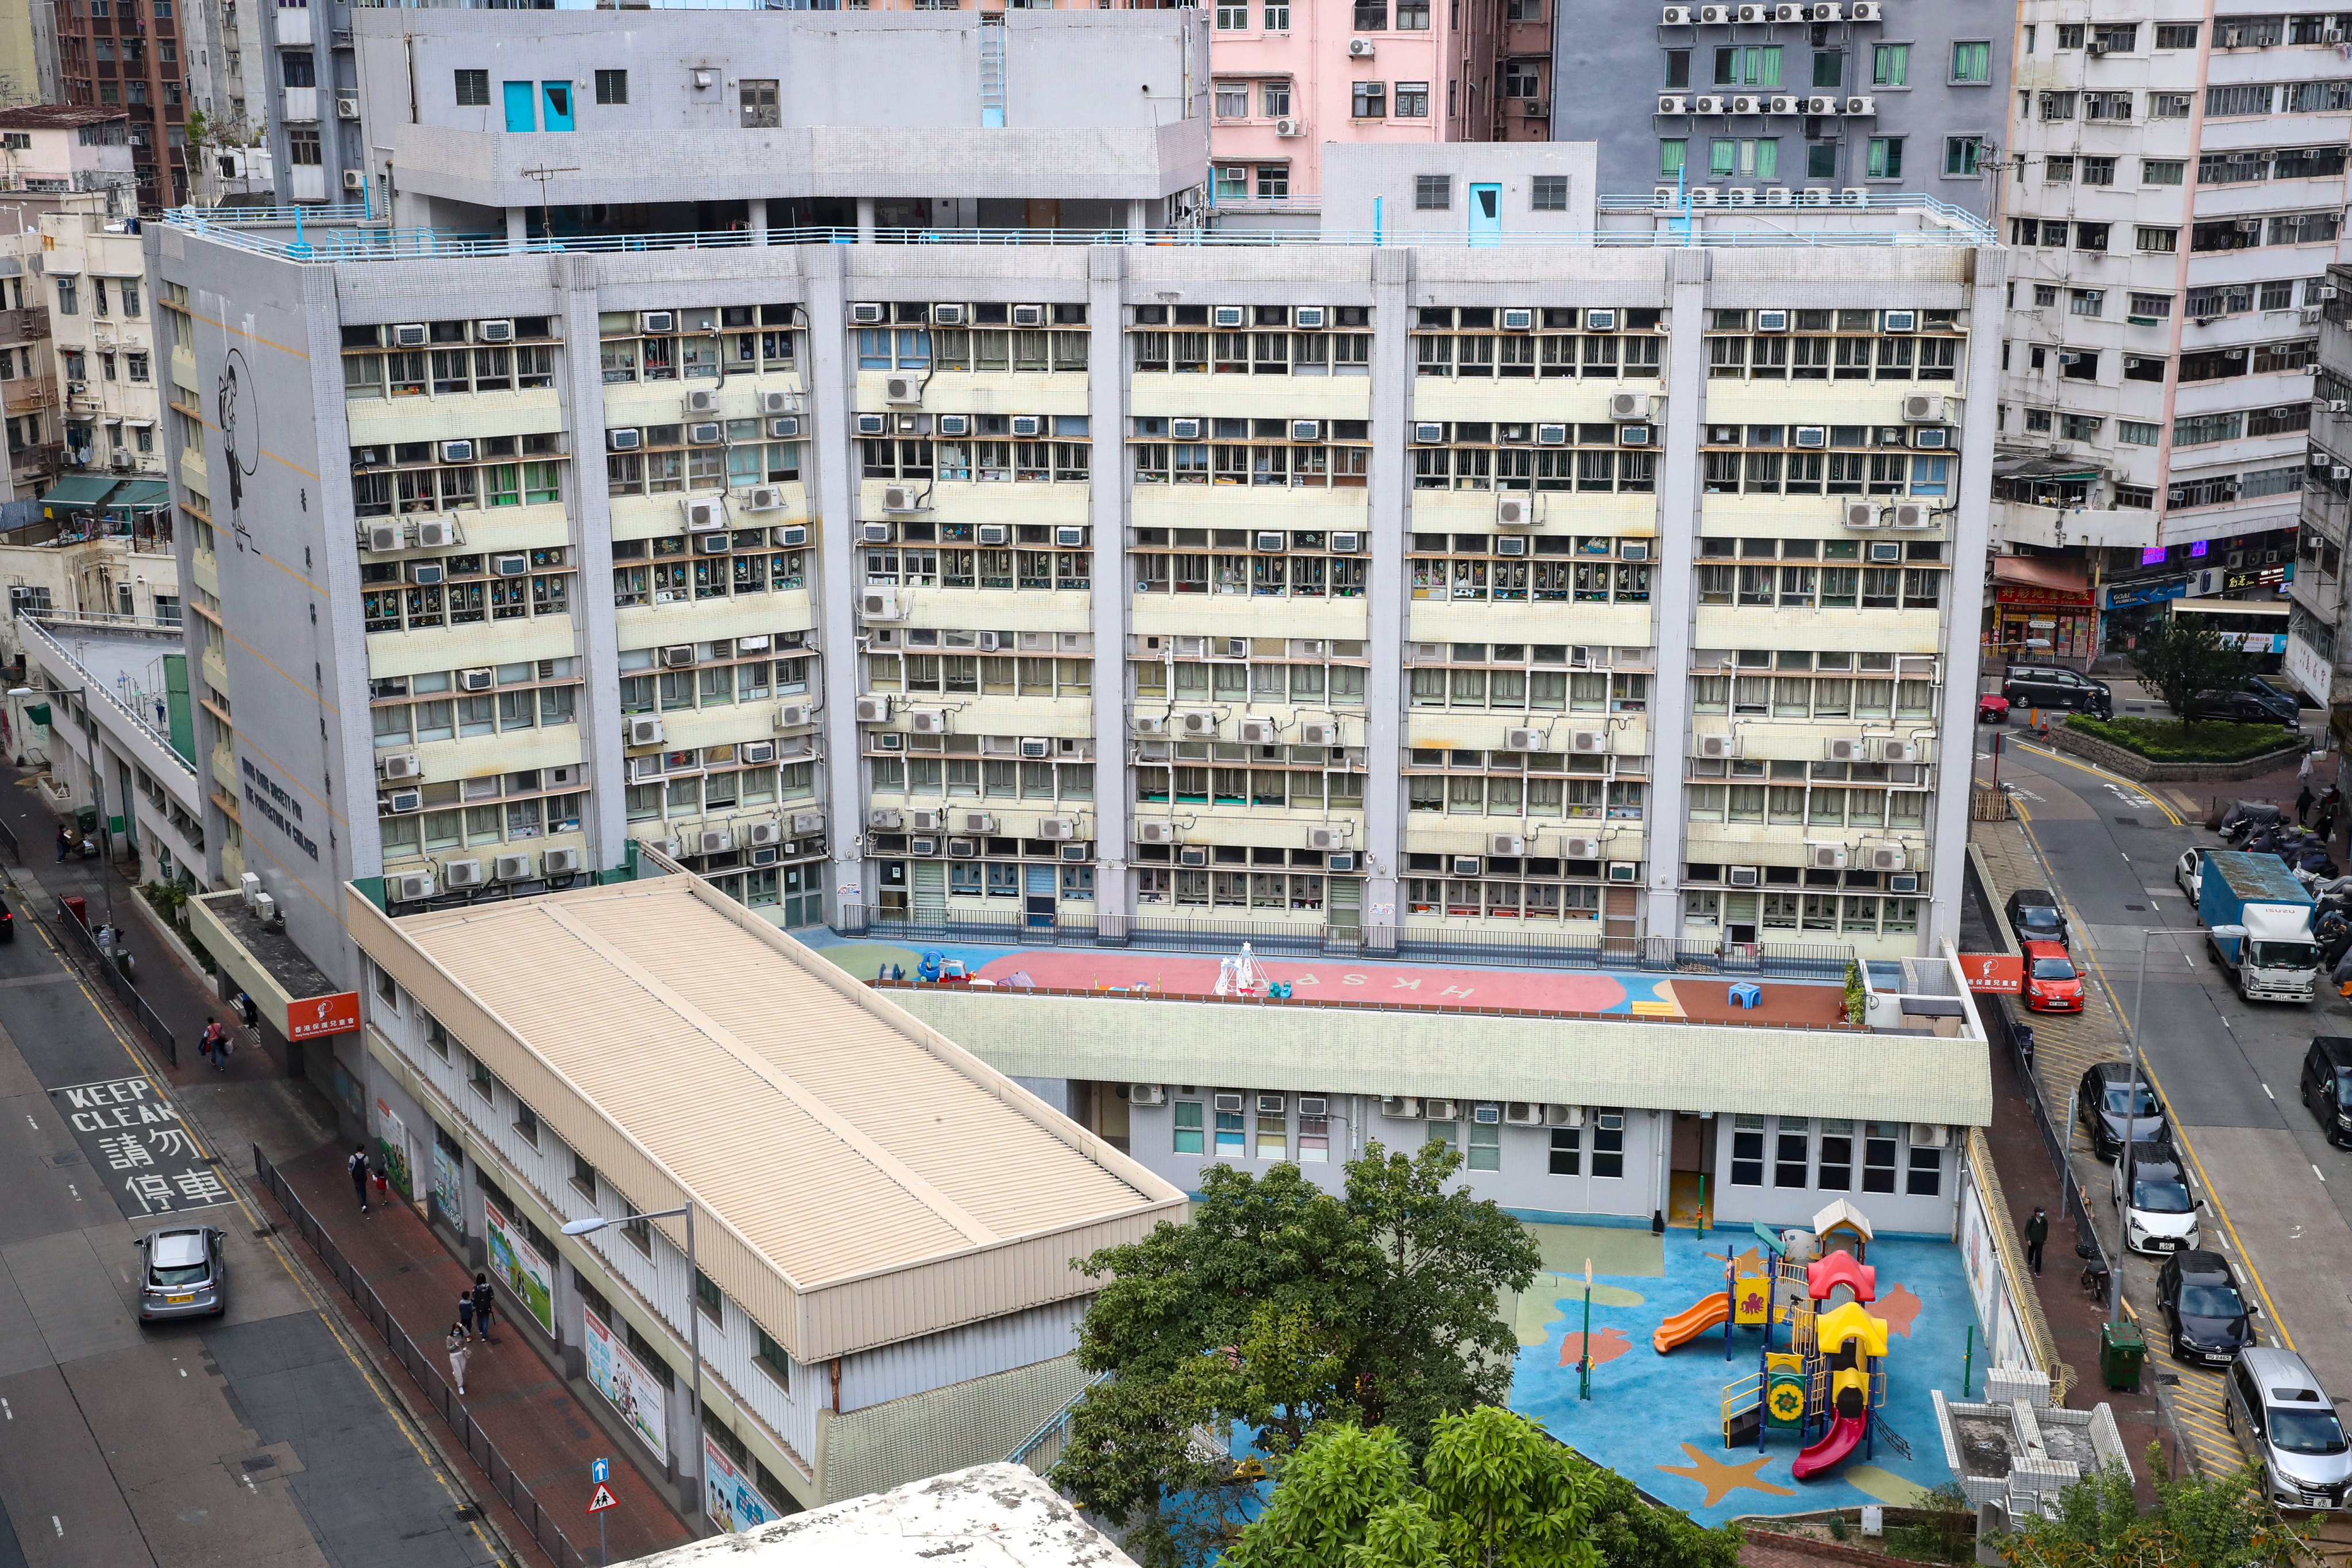 The Society for the Protection of Children will add a new floor to its Mong Kok headquarters to provide extra services to children and parents. Photo: Edmond So